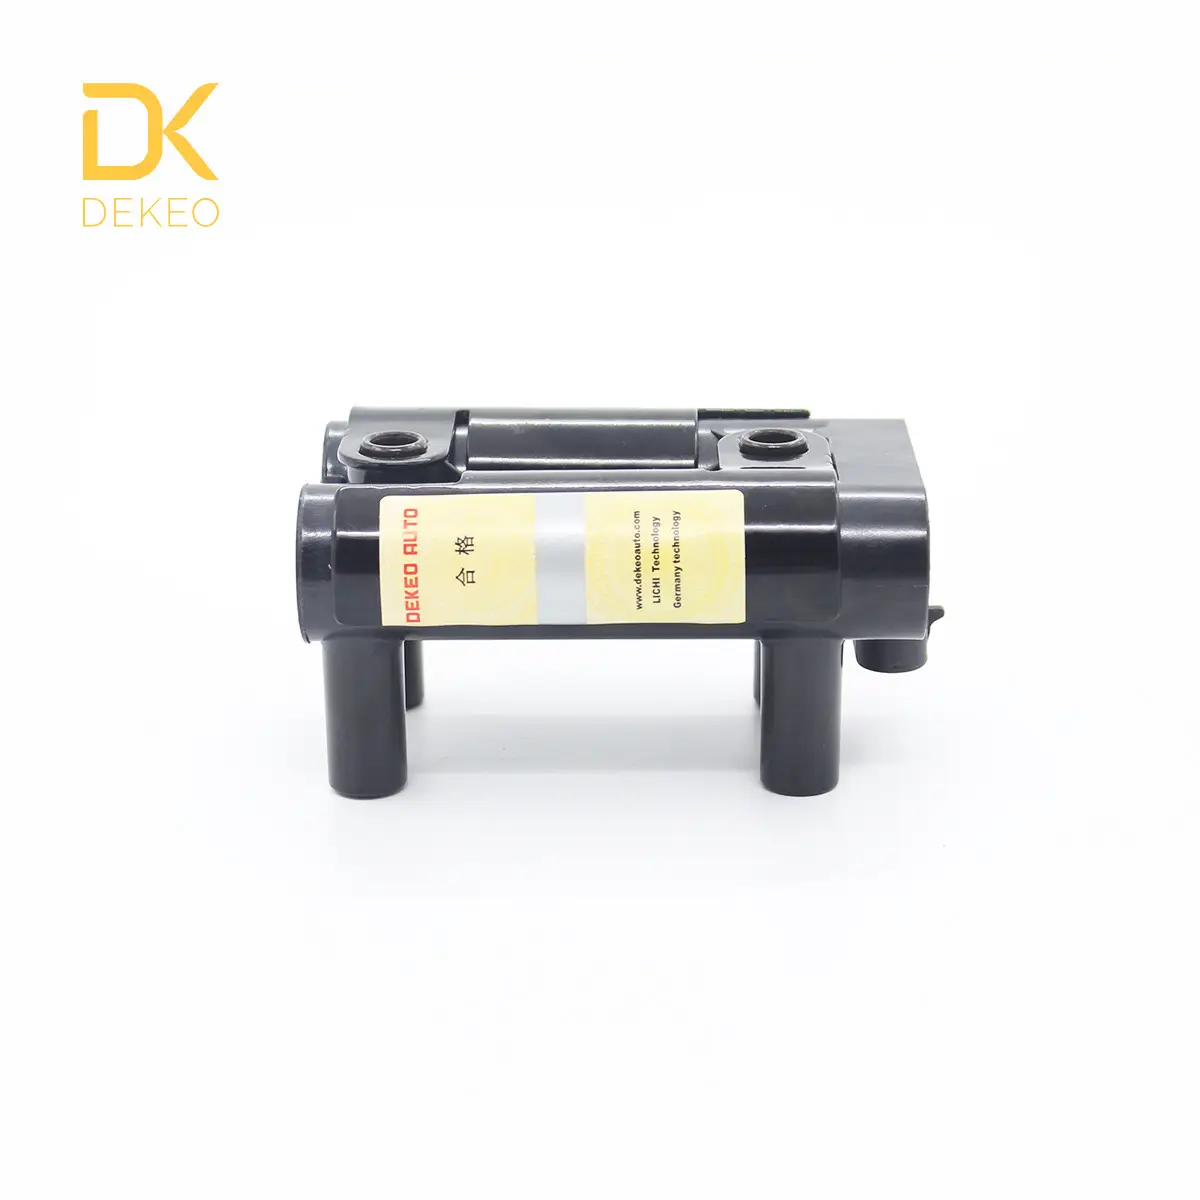 High Quality Auto Ignition Coil Pack OEM 19005270 19005338 For Great Wall Wagons 1.3L Daewoo Opel Coil Ignition 1136000417